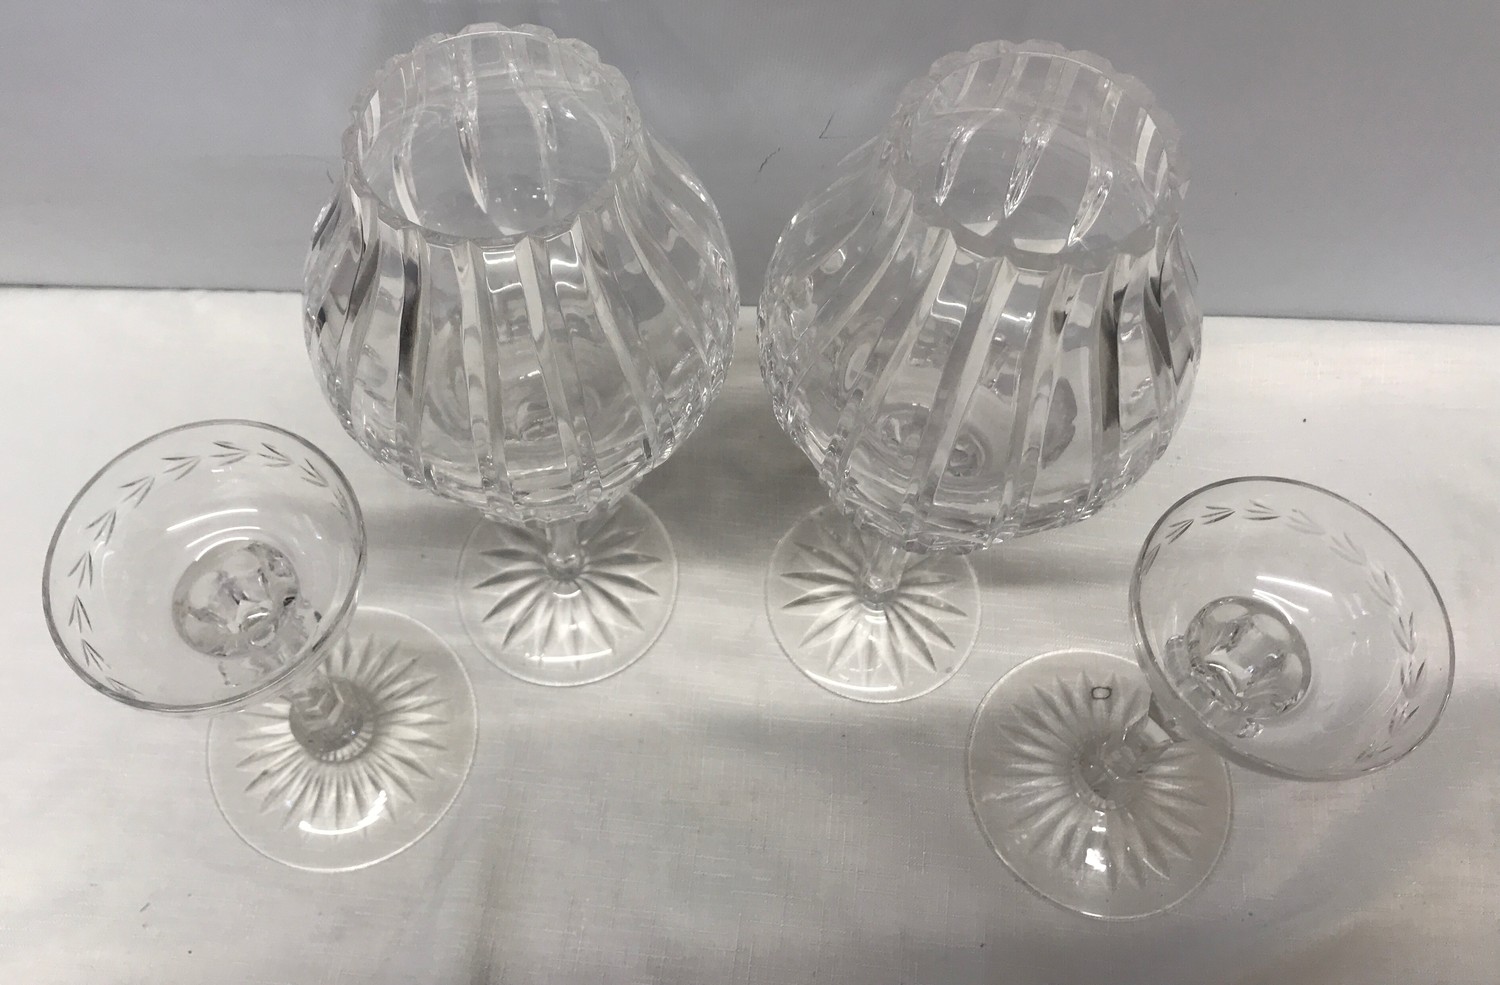 Two pairs of cut glass candlesticks, one pair with shades, 31cms h, small pair 20cms h.Condition - Image 2 of 3